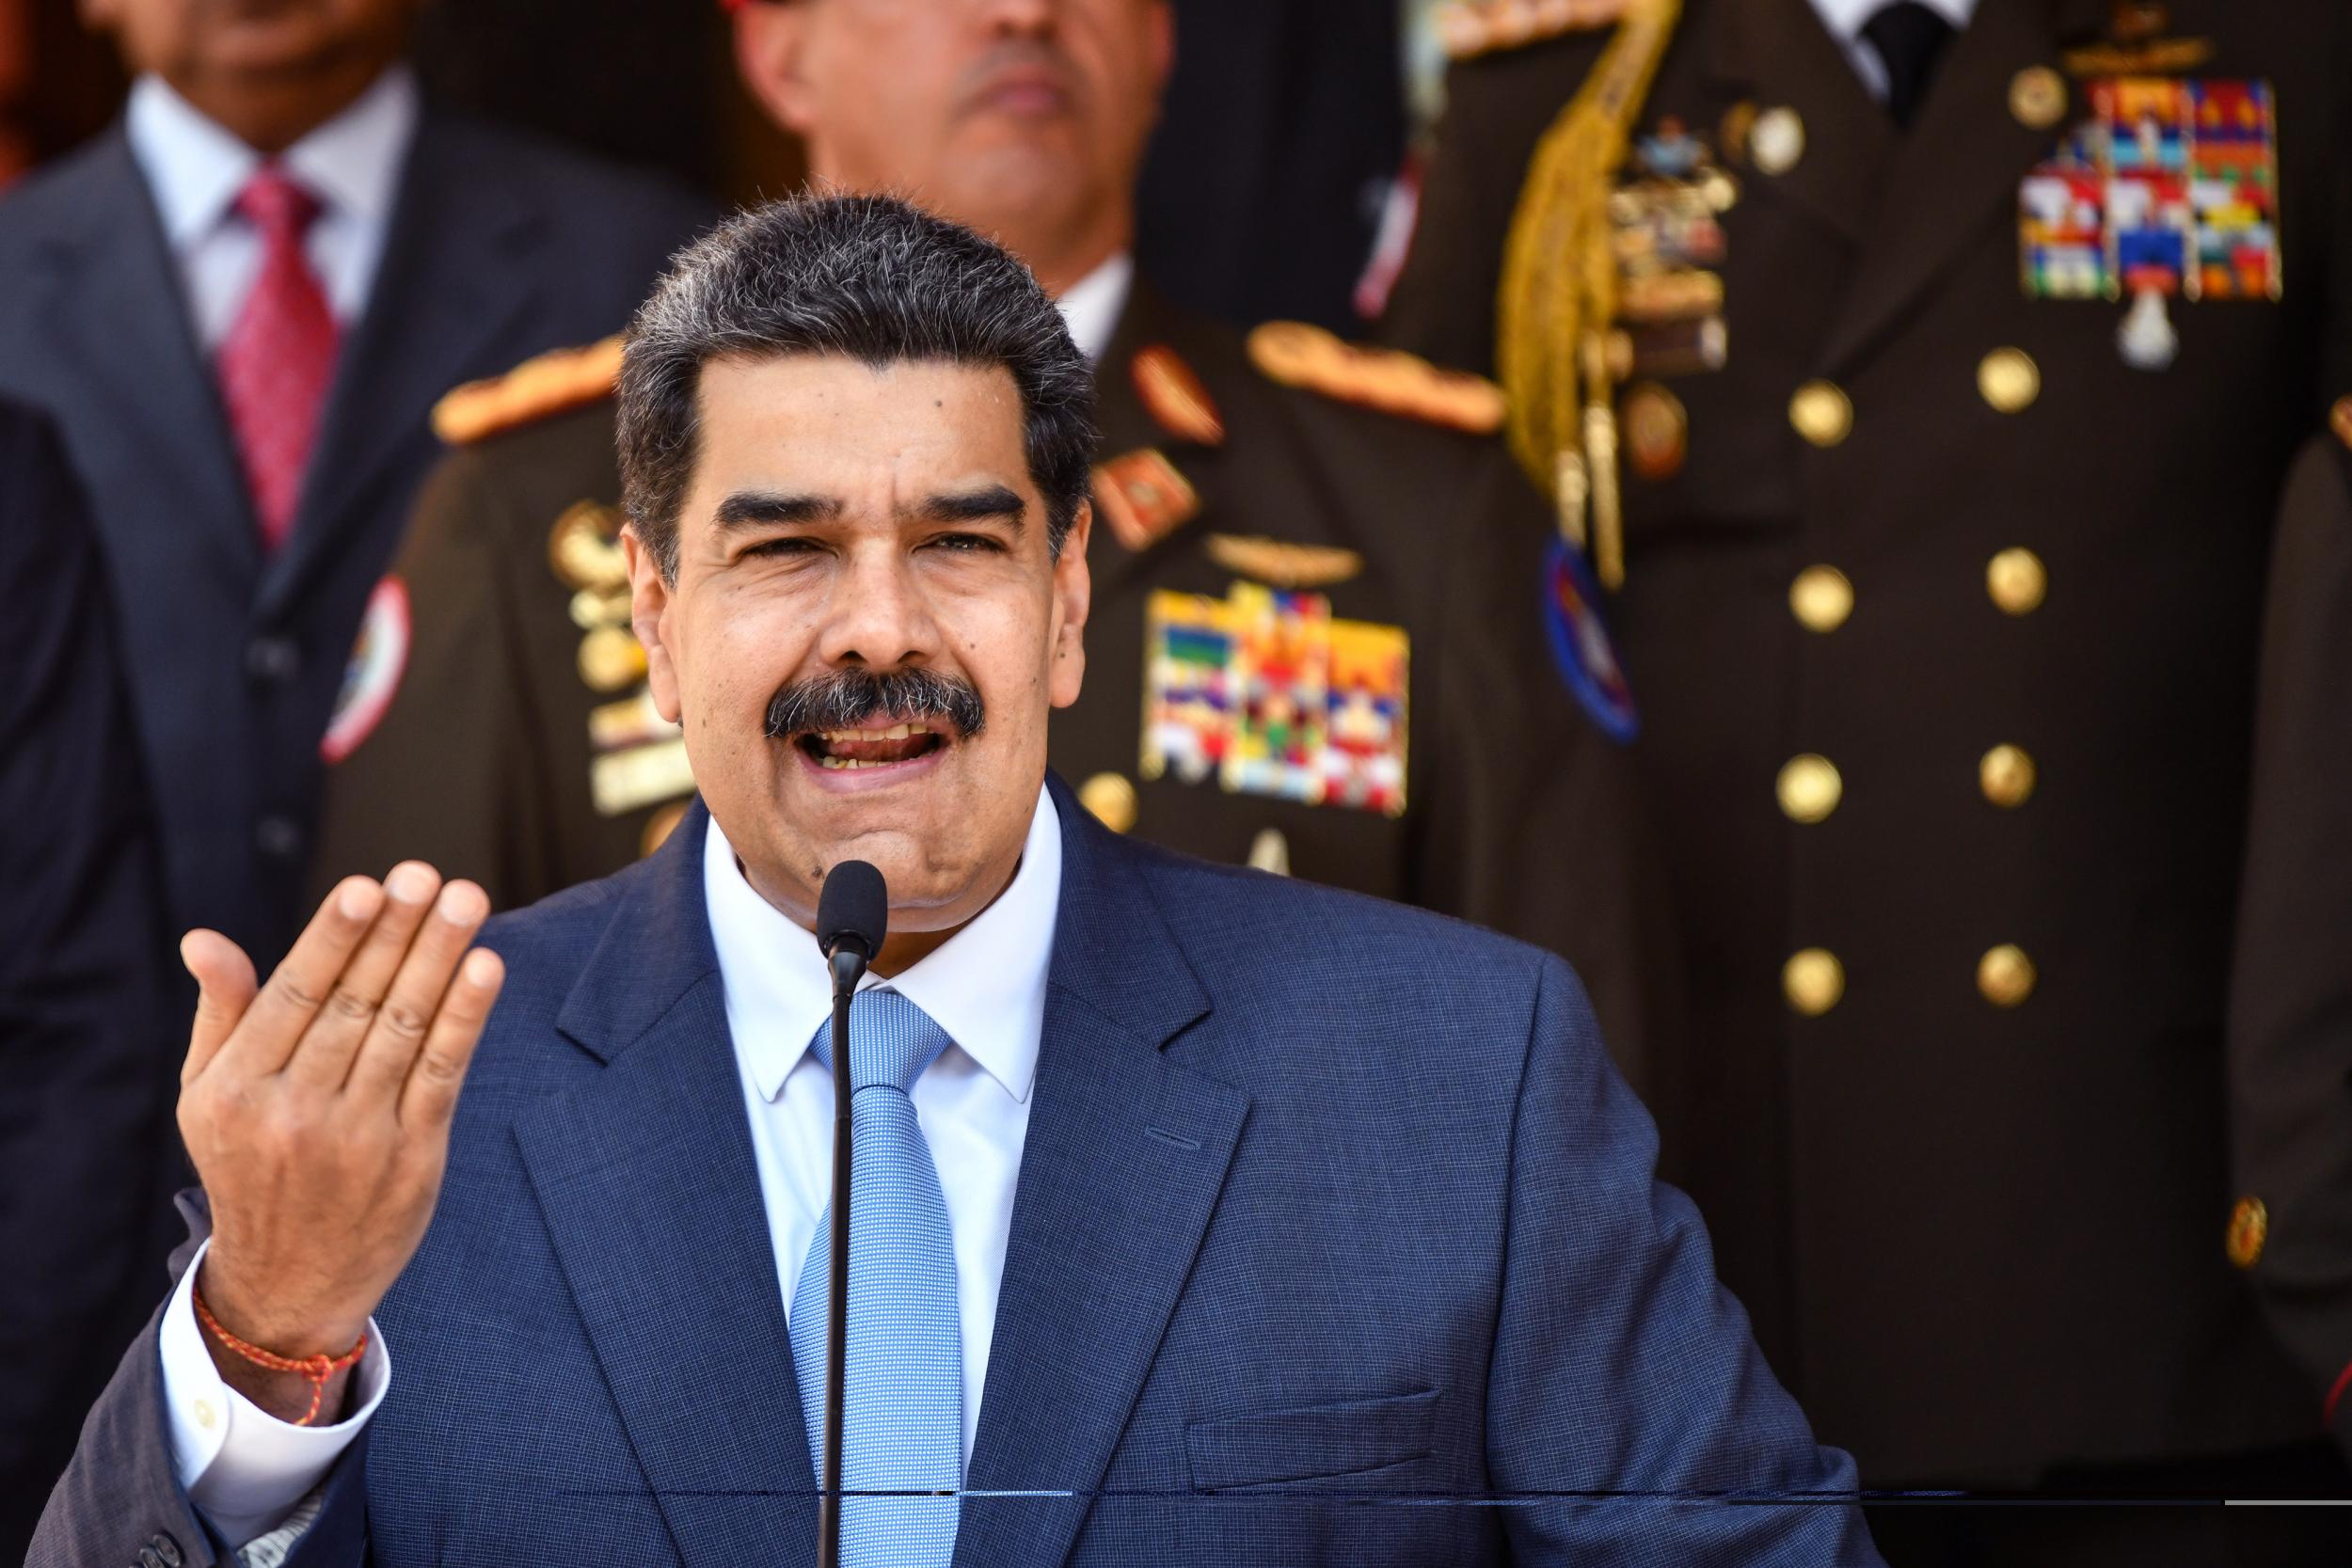 Venezuelan officials said they had thwarted a predawn invasion aimed at killing Maduro